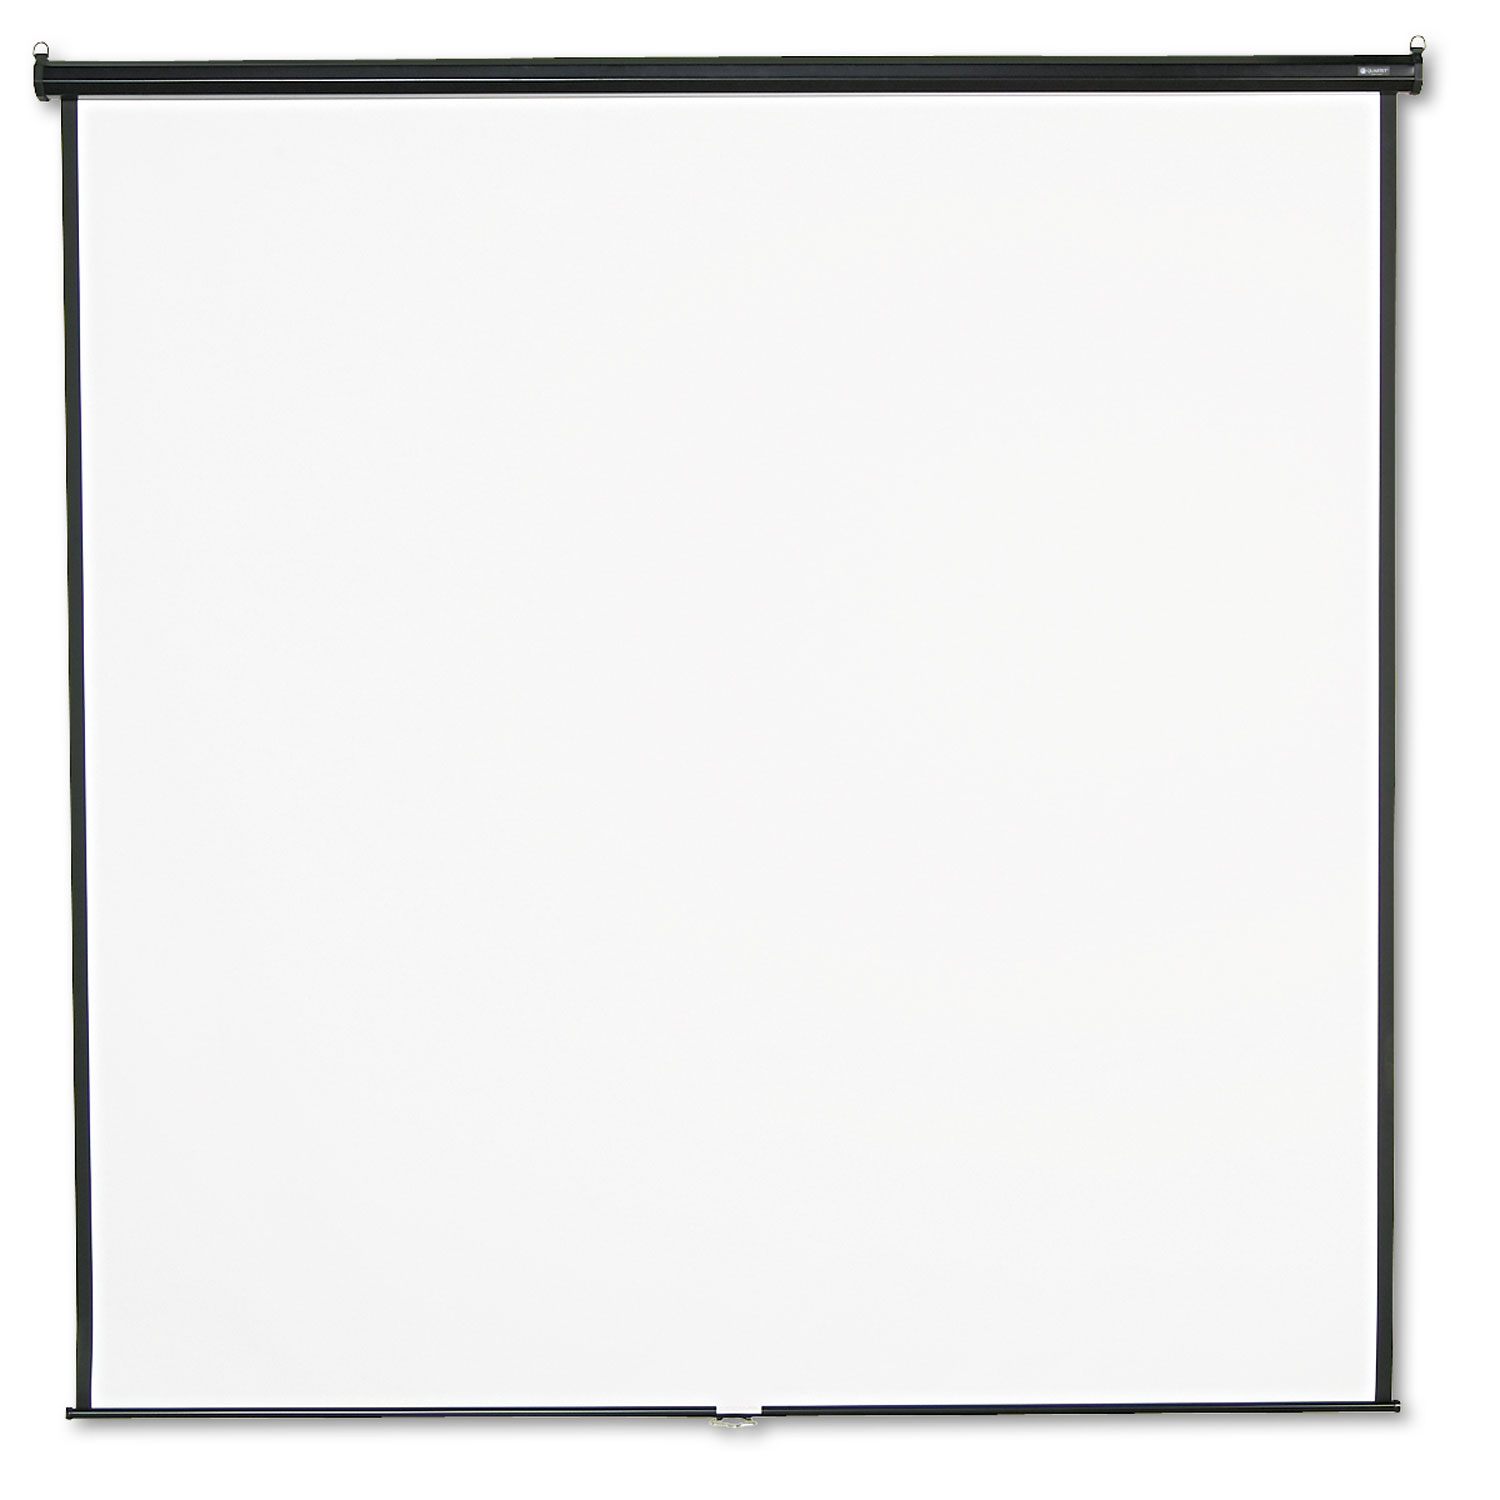 Wall or Ceiling Projection Screen, 96 x 96, White Matte, Black Matte Casing